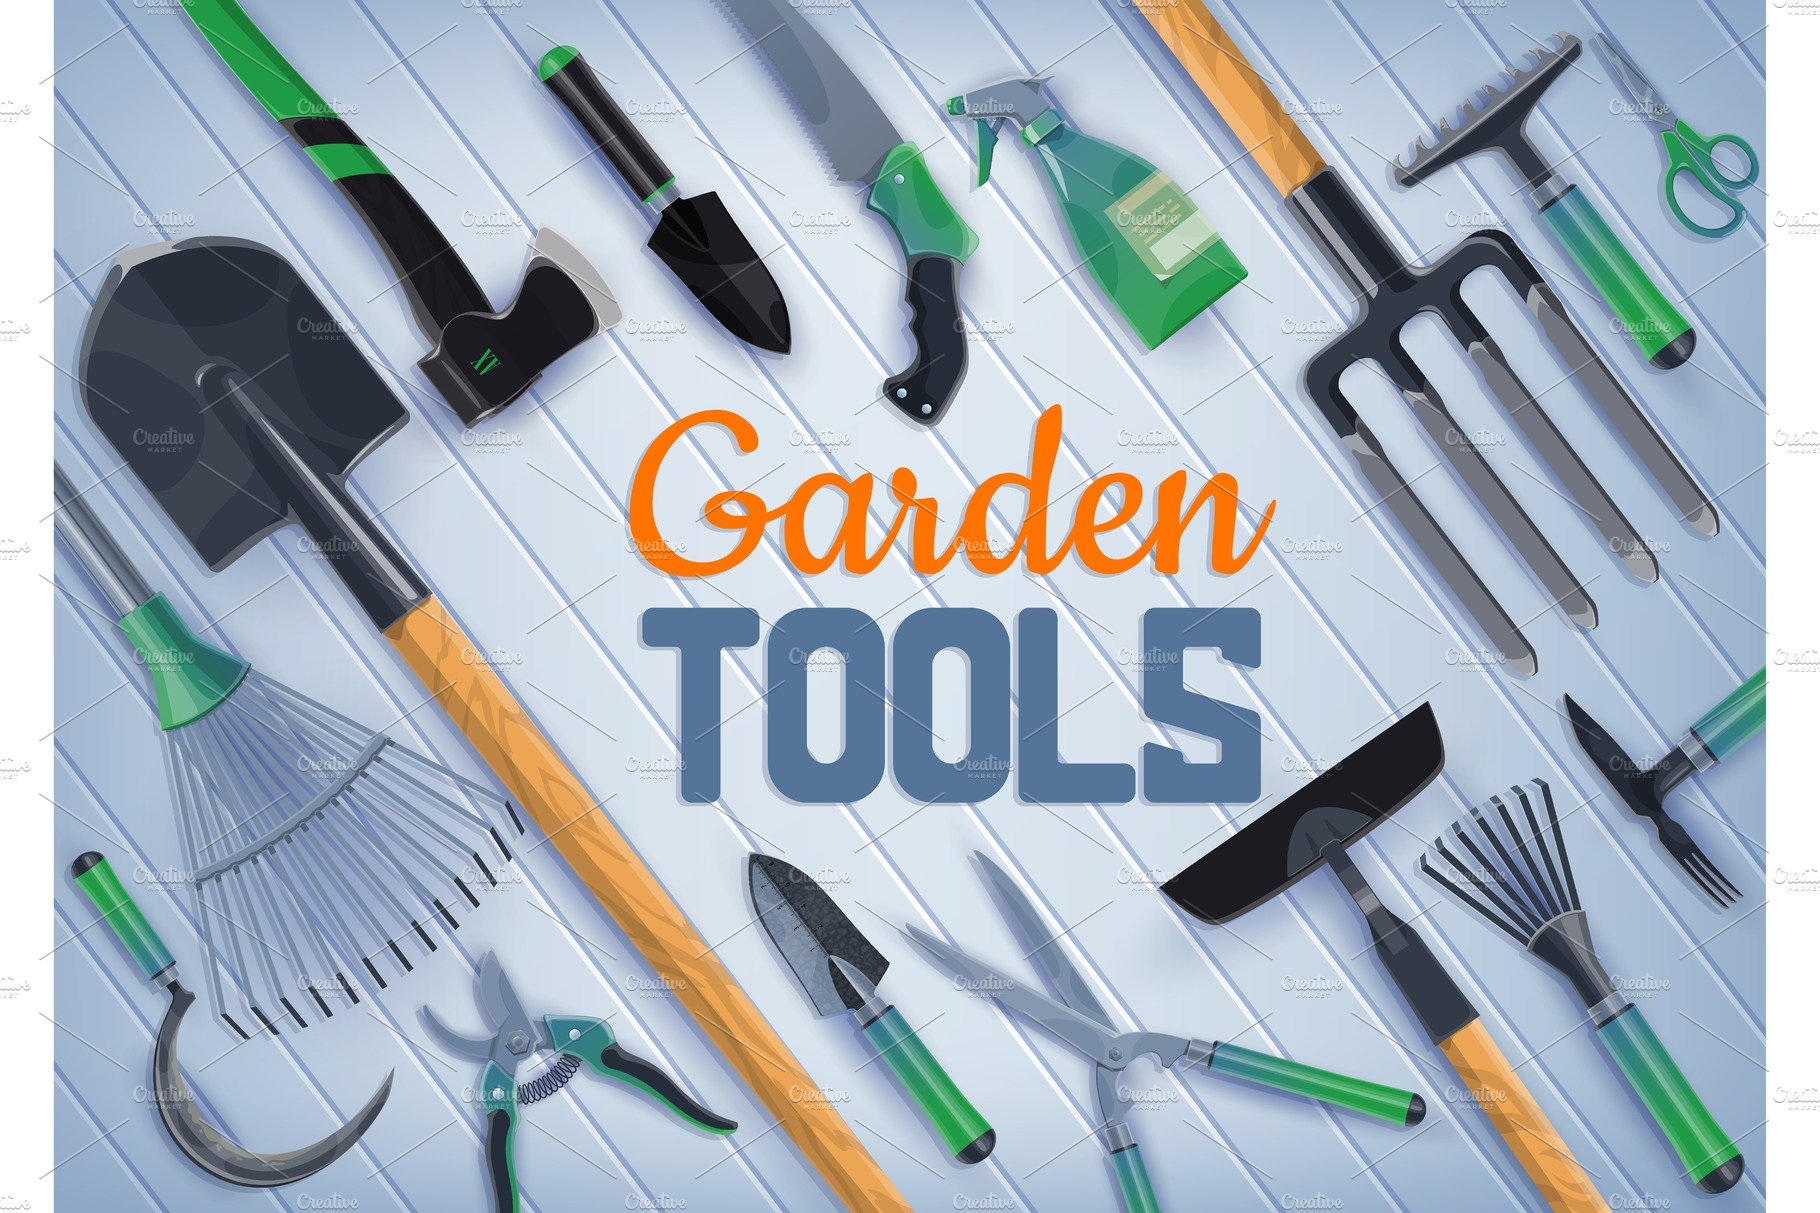 Farm and garden tools cover image.